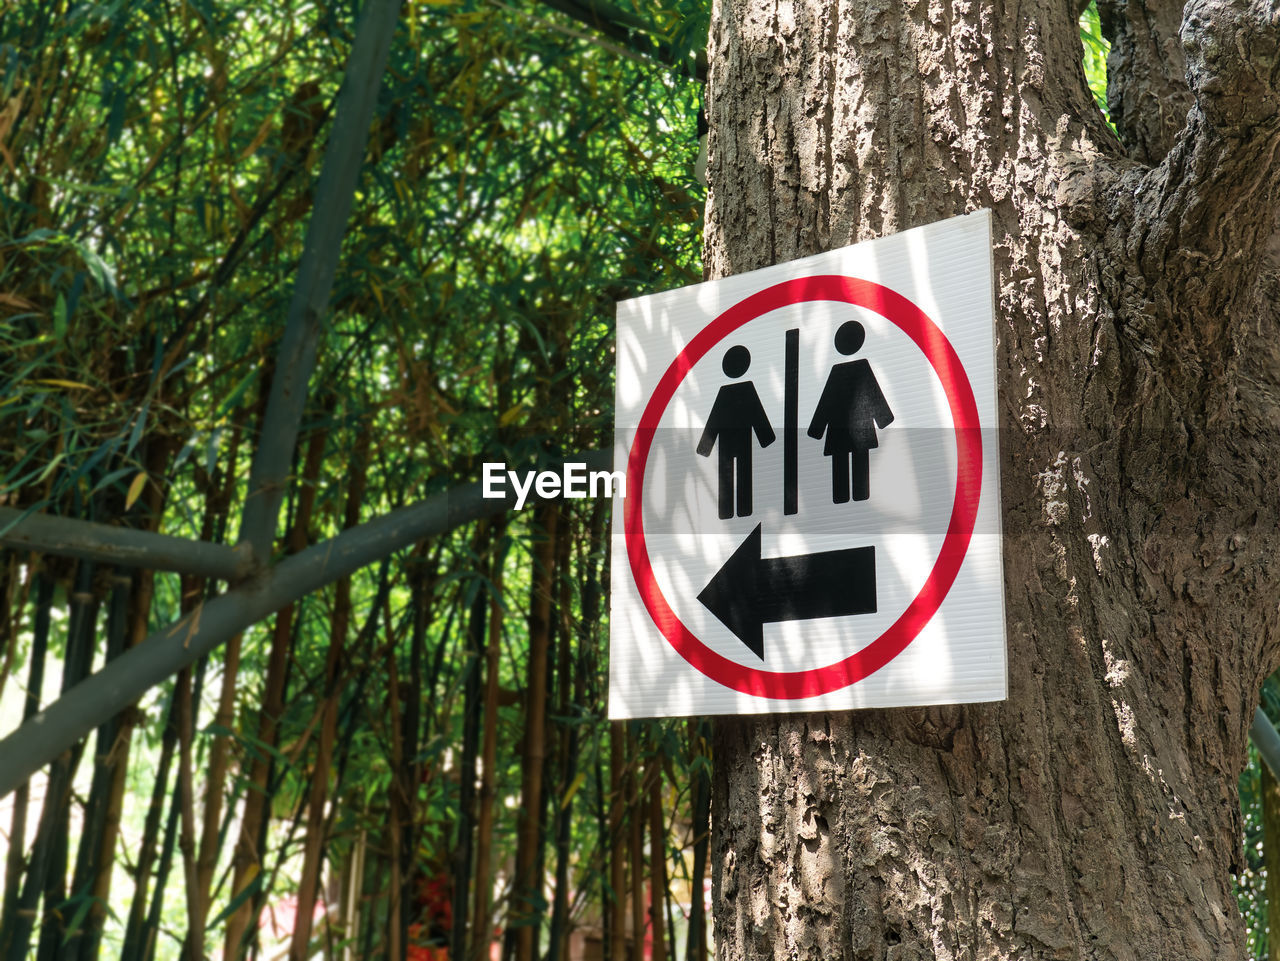 Black toilet sign with arrow inside red circle hanging on the tree